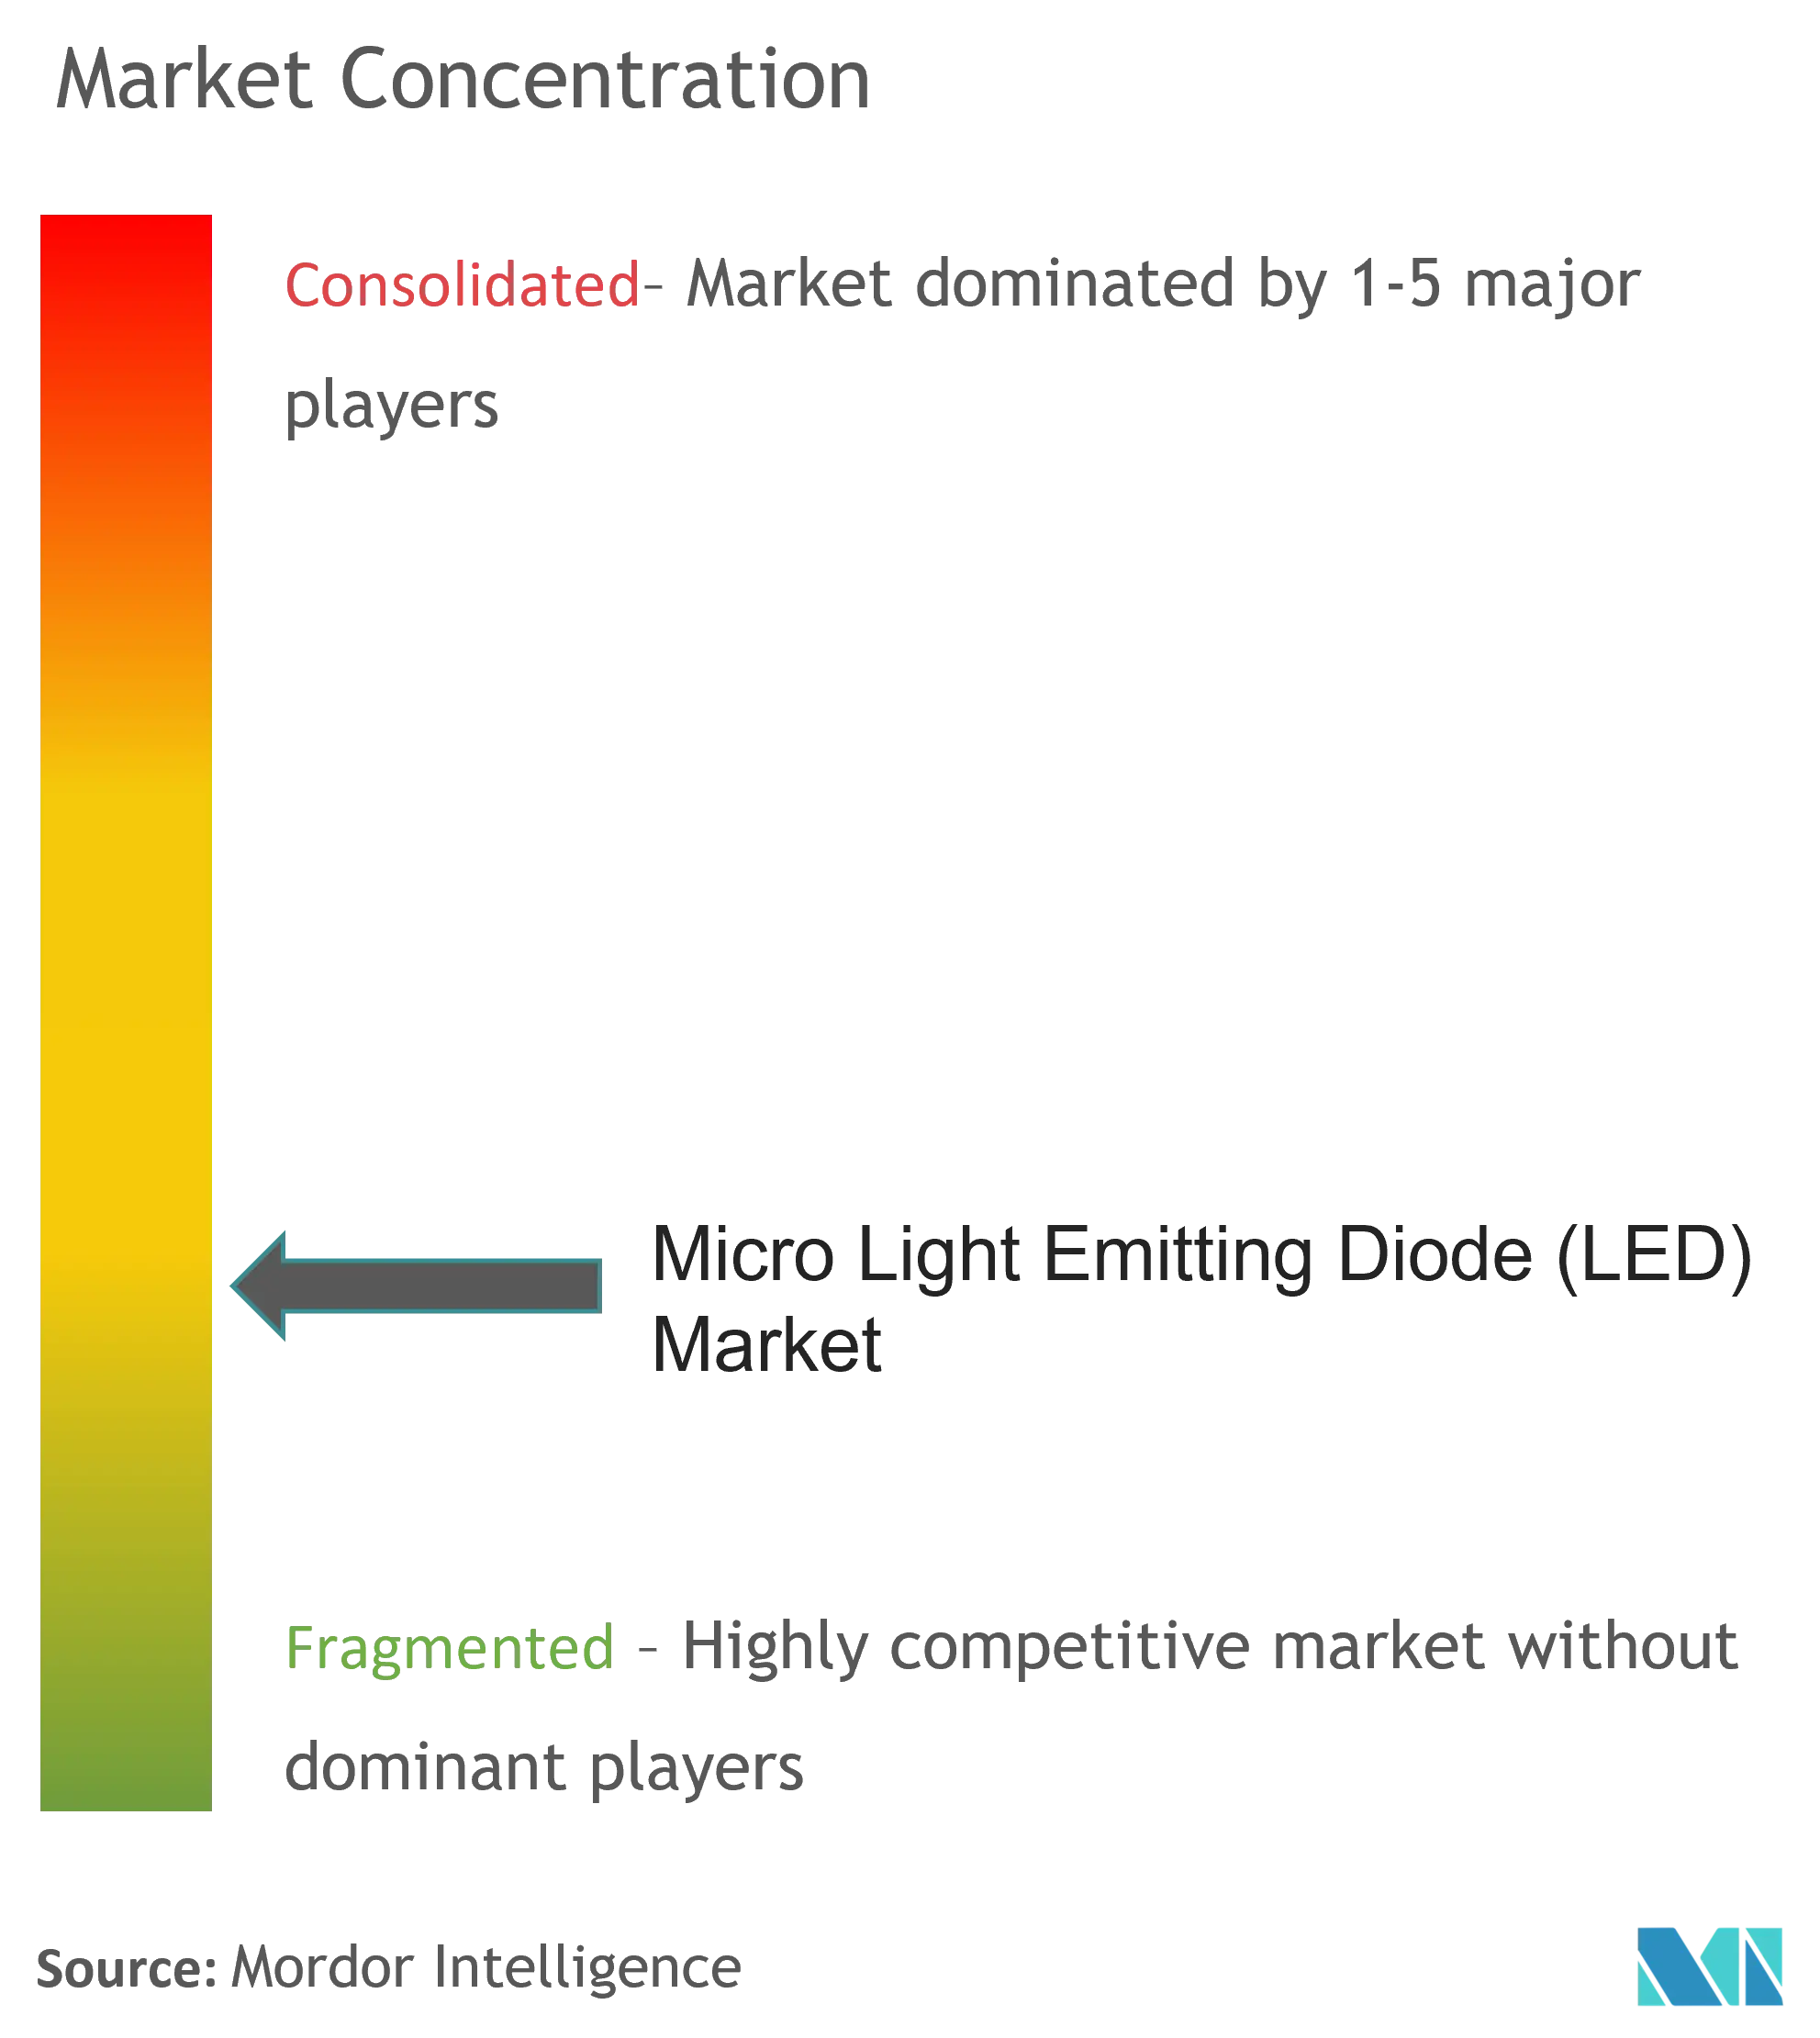 Micro LED Market Concentration